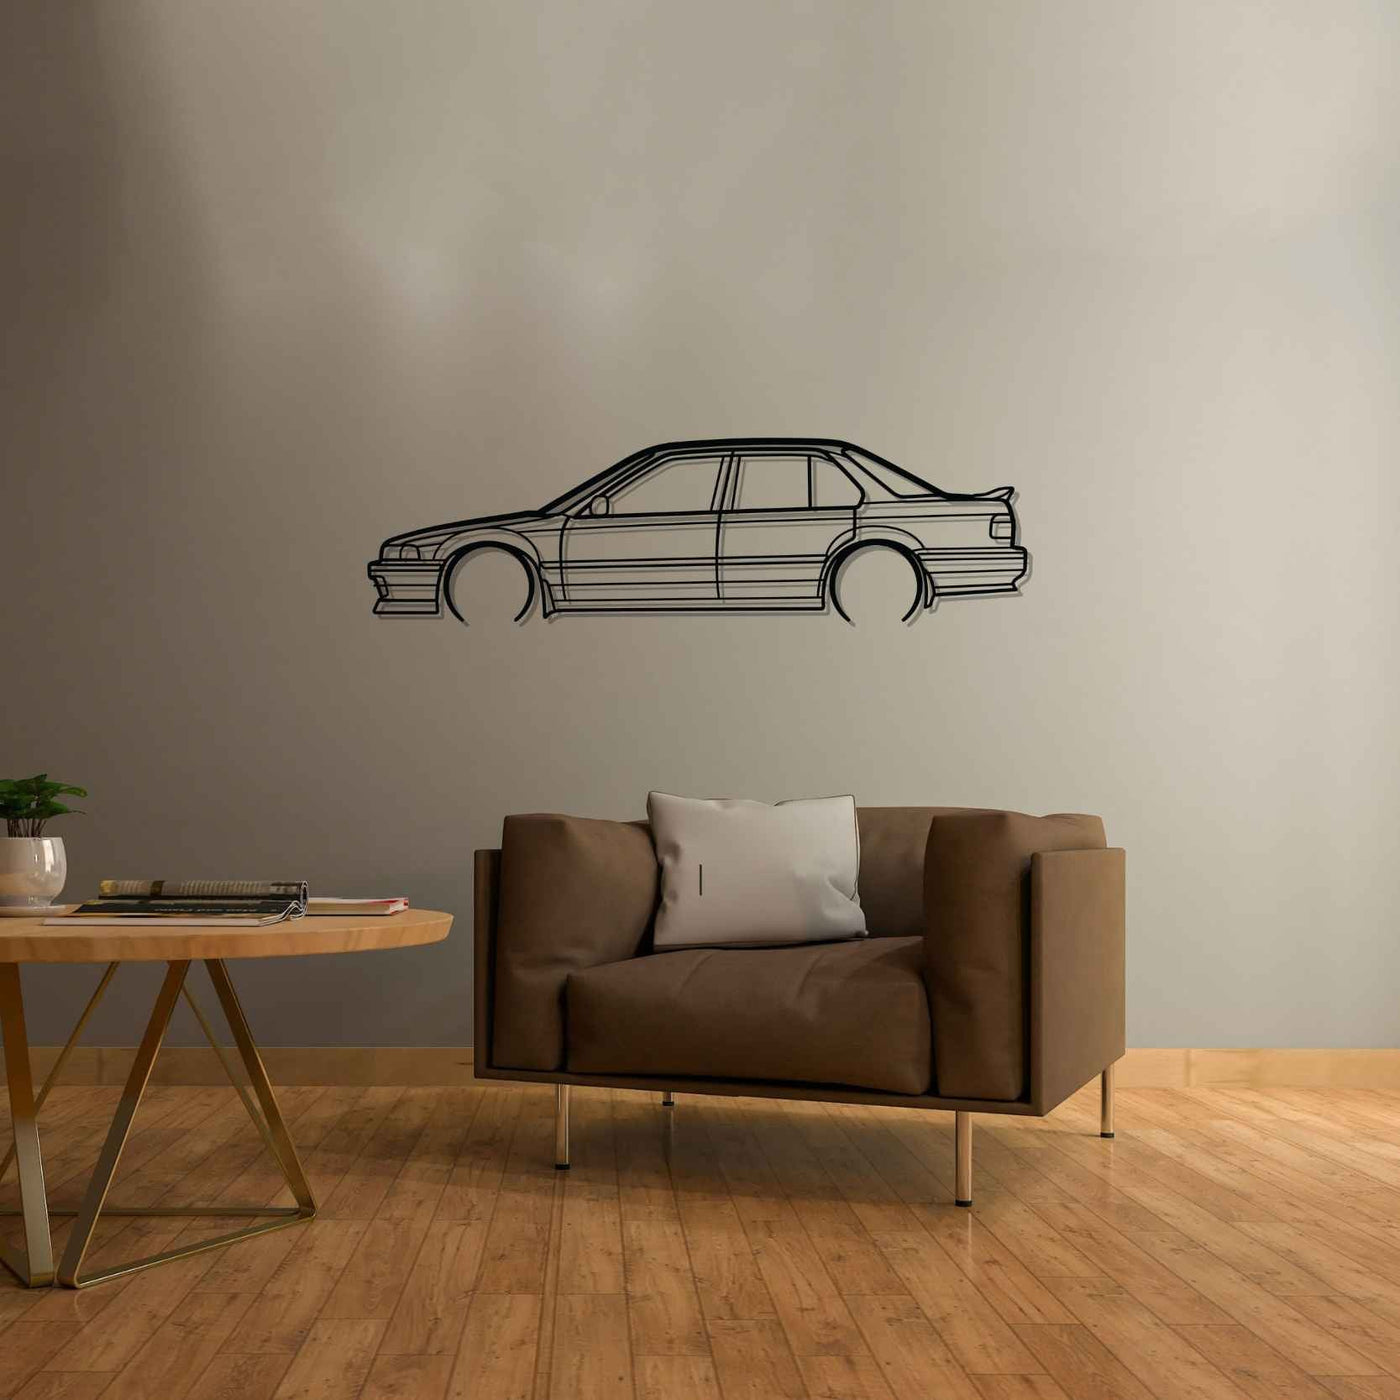 Accord 1990 Detailed Silhouette Metal Wall Art